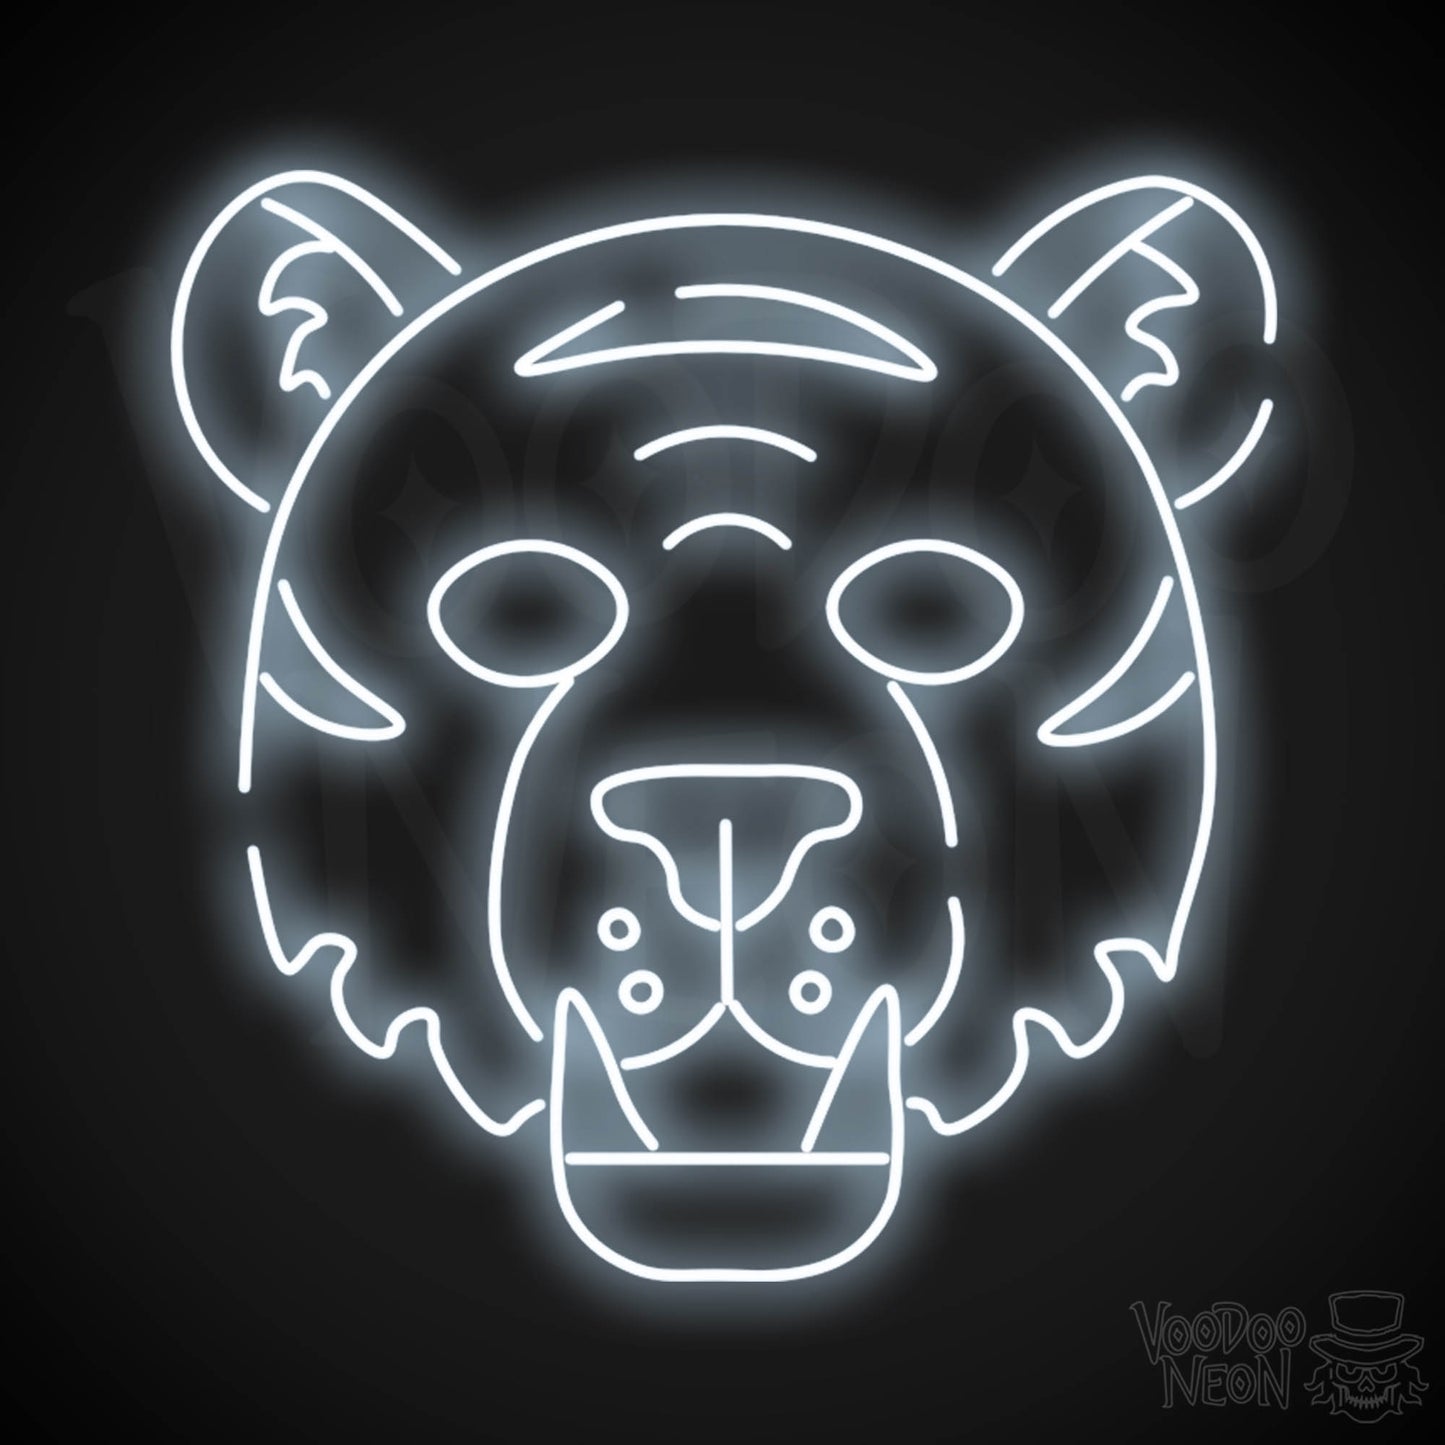 Neon Tiger Wall Art - Neon Tiger Sign - Tiger Neon Sign - LED Sign - Color Cool White